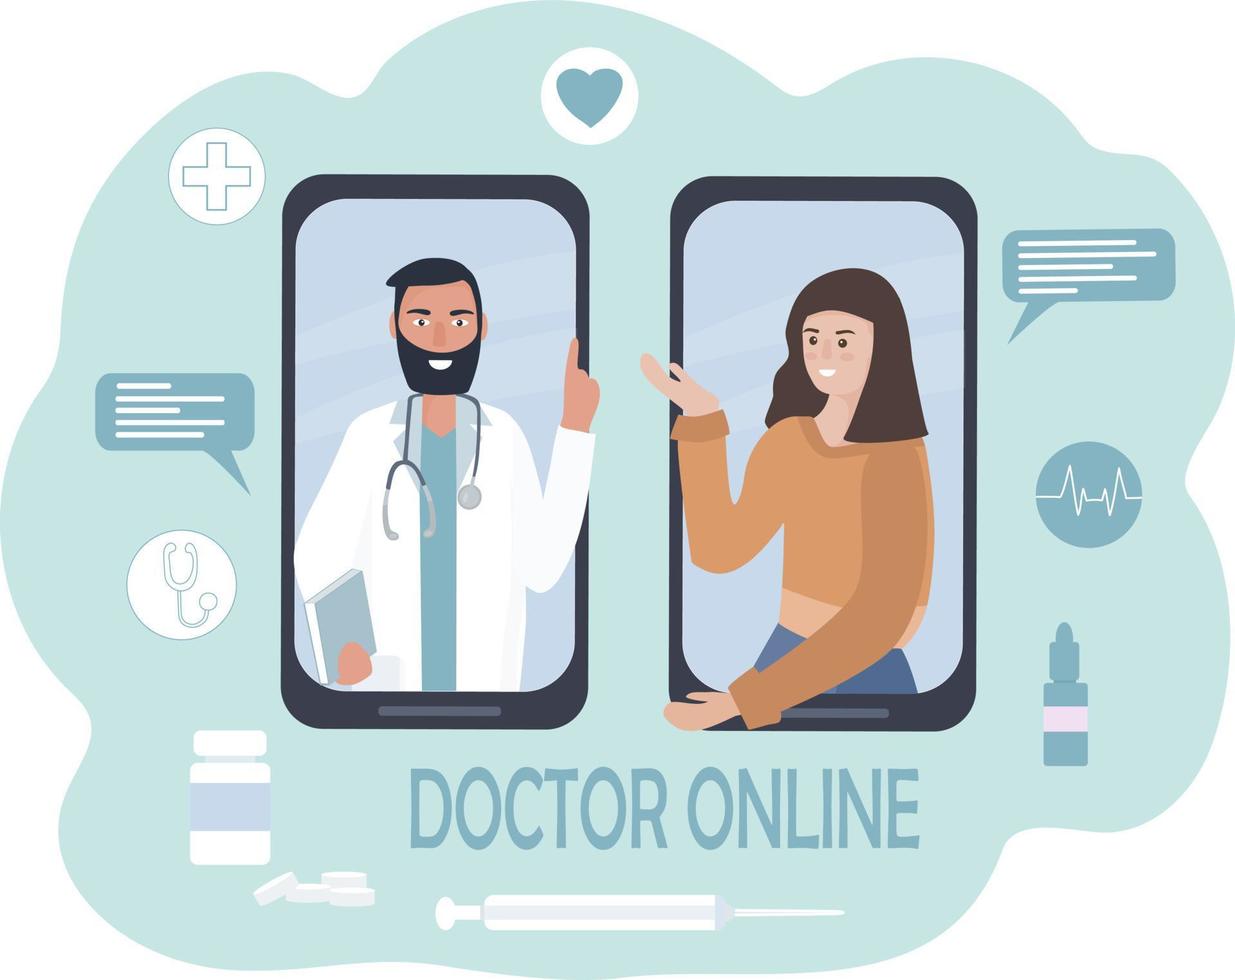 Online medical consultation and care. A person talks to a doctor on a cell phone, using video calls and messenger messages. Telemedicine, remote communication between the patient and the doctor vector